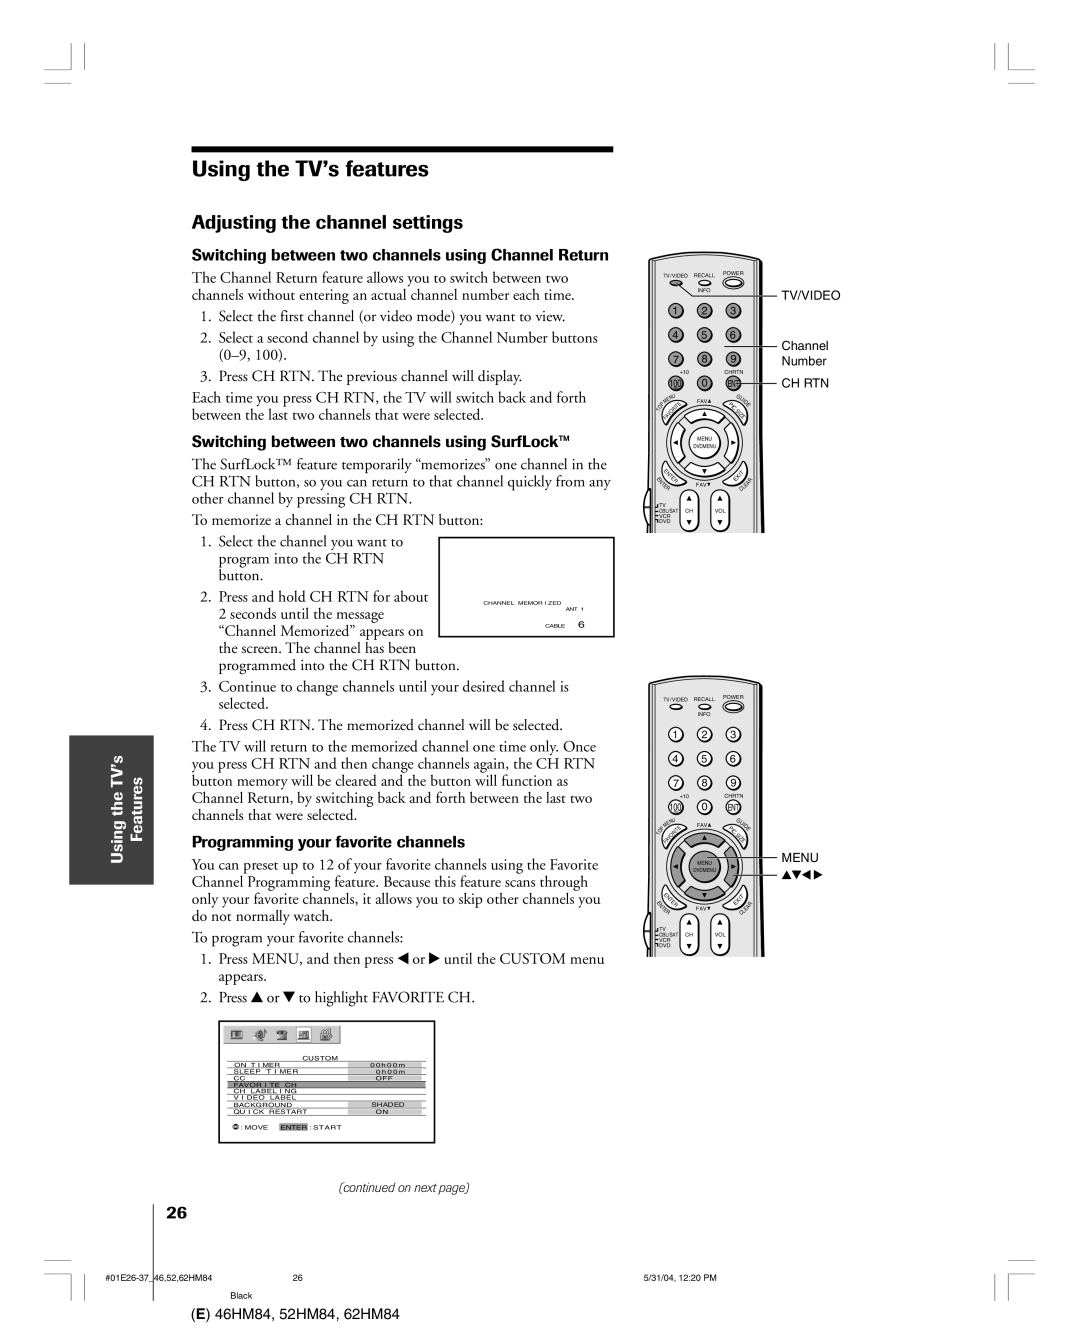 Toshiba 46HM84 Using the TVÕs features, Adjusting the channel settings, Switching between two channels using SurfLockª 